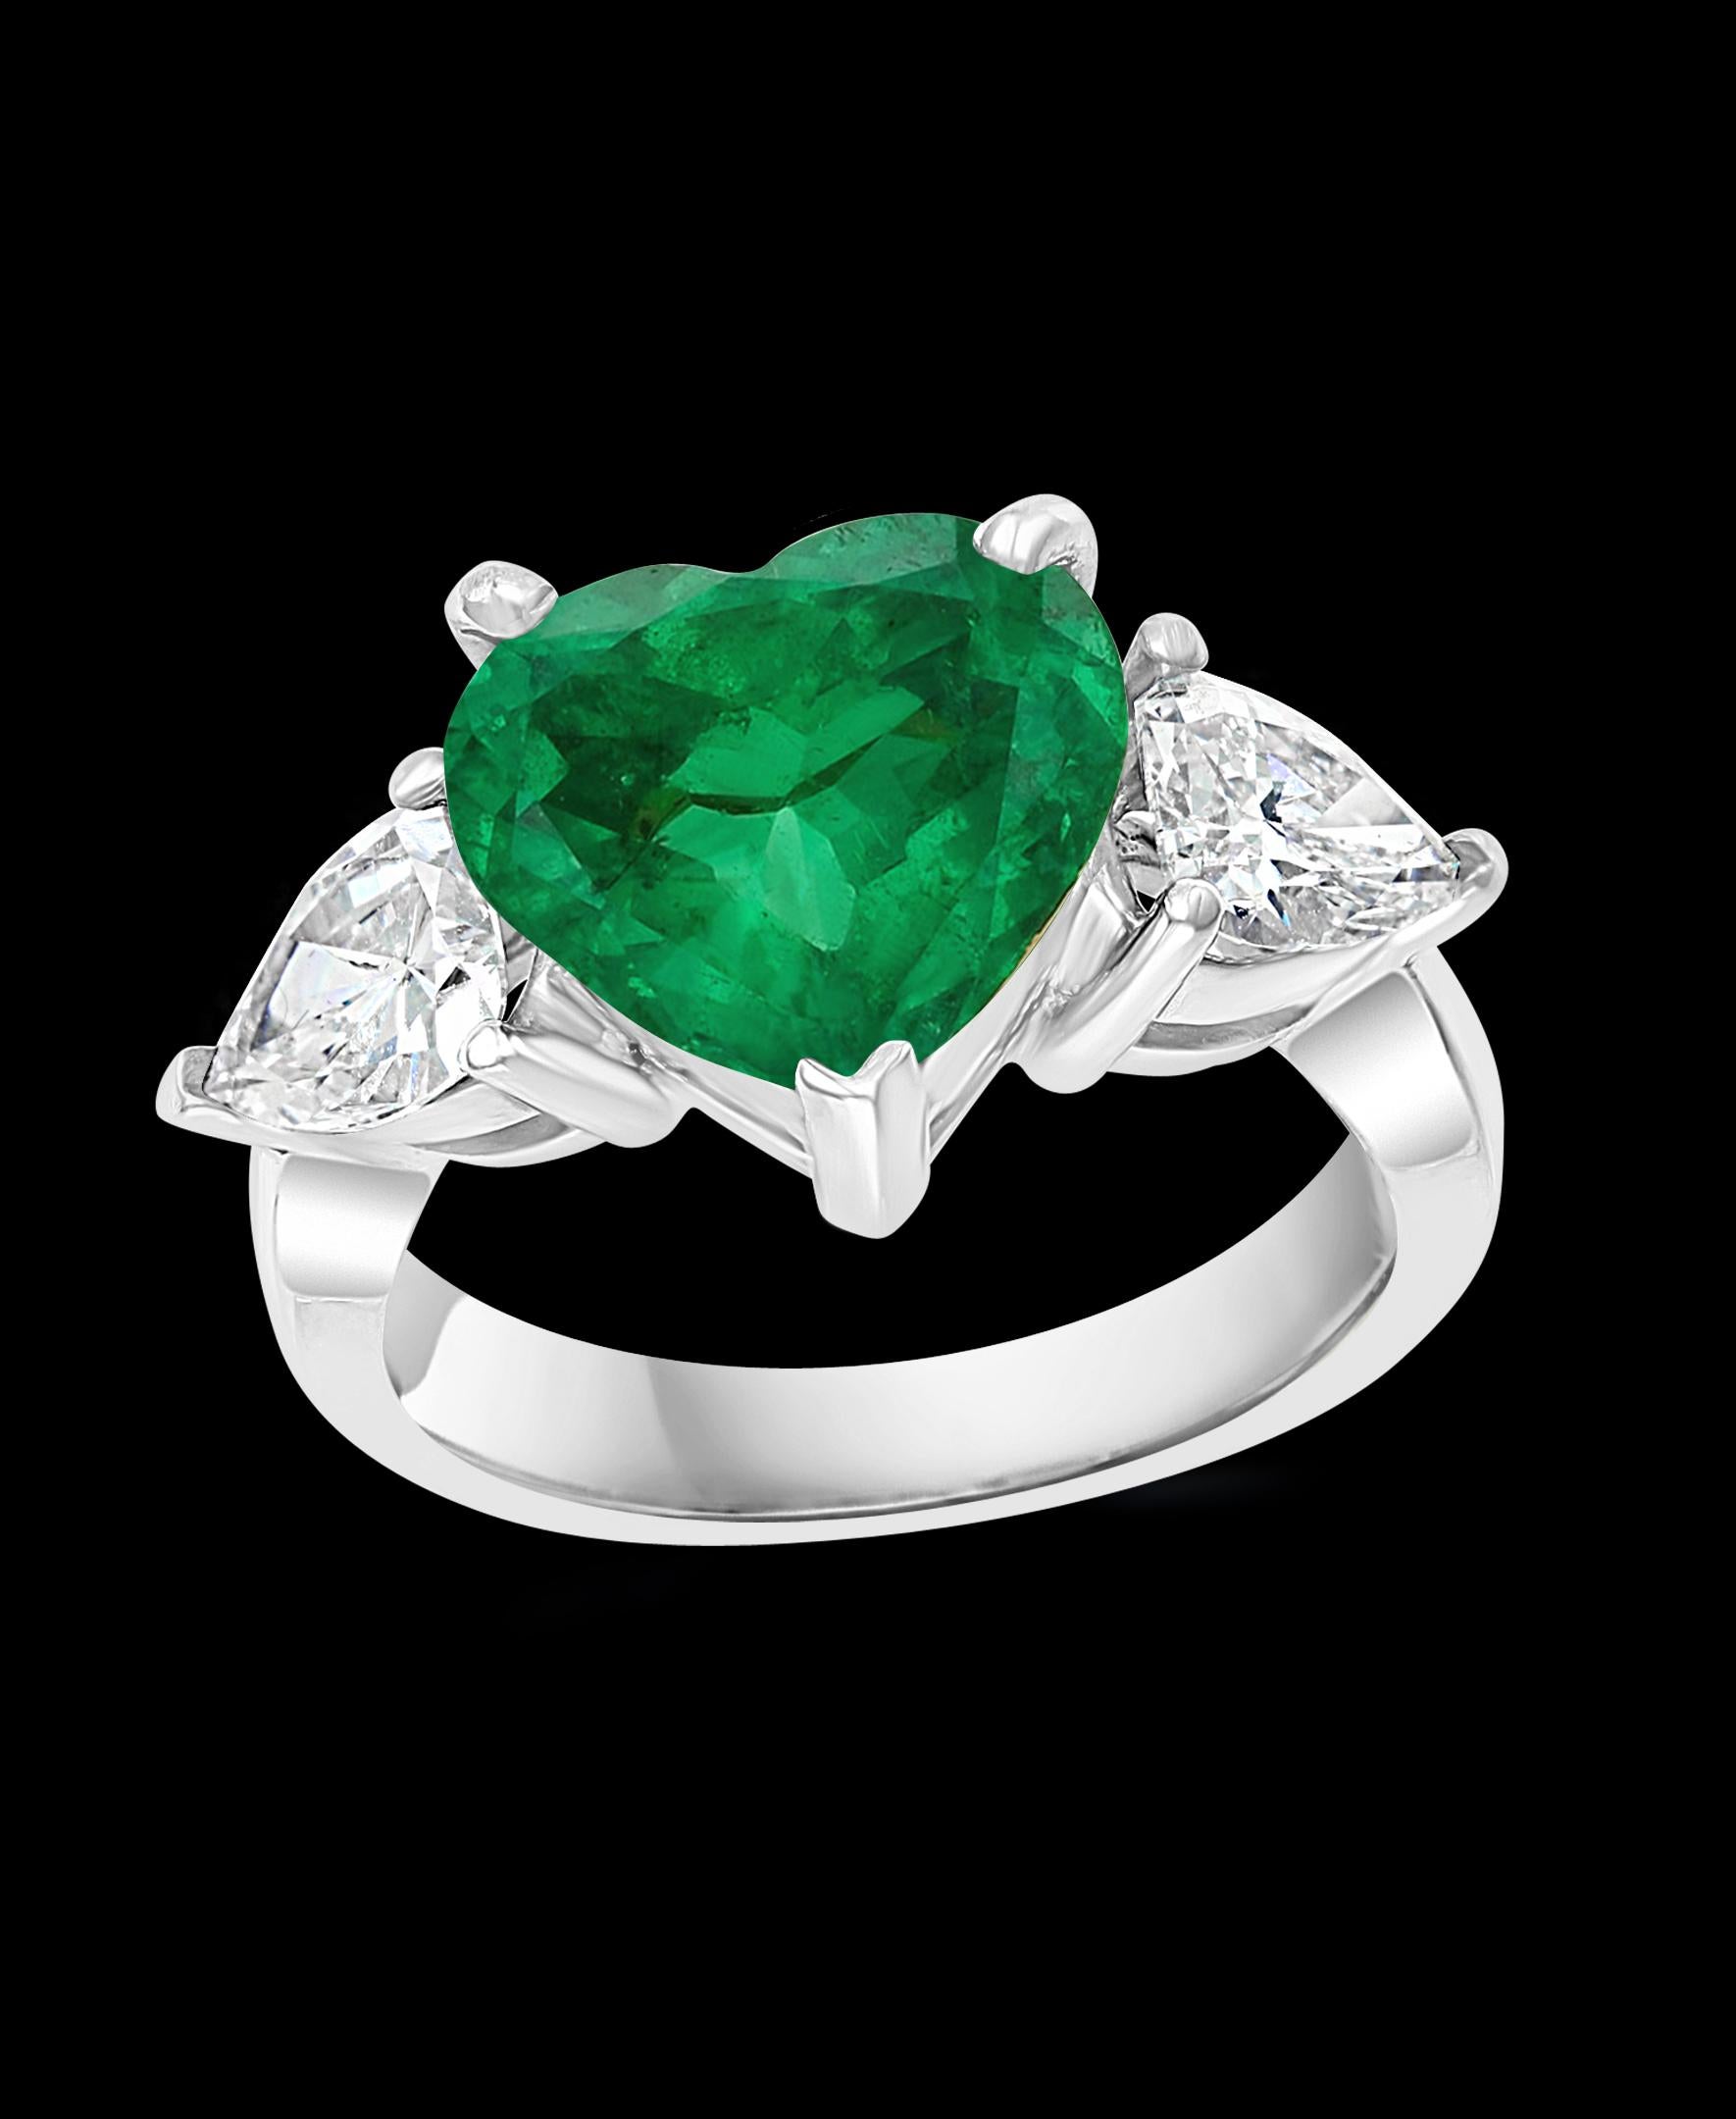 A classic, Cocktail ring , Perfect gift for Valentine's day !!
4 Carat Heart Shape Colombian Emerald & 1.3 Ct Diamond 18 Karat Gold Ring Estate
Gold: 18 Karat white gold , Weight: 8 gram
Two solitaire Pear shape diamond each approximately 0.7 ct